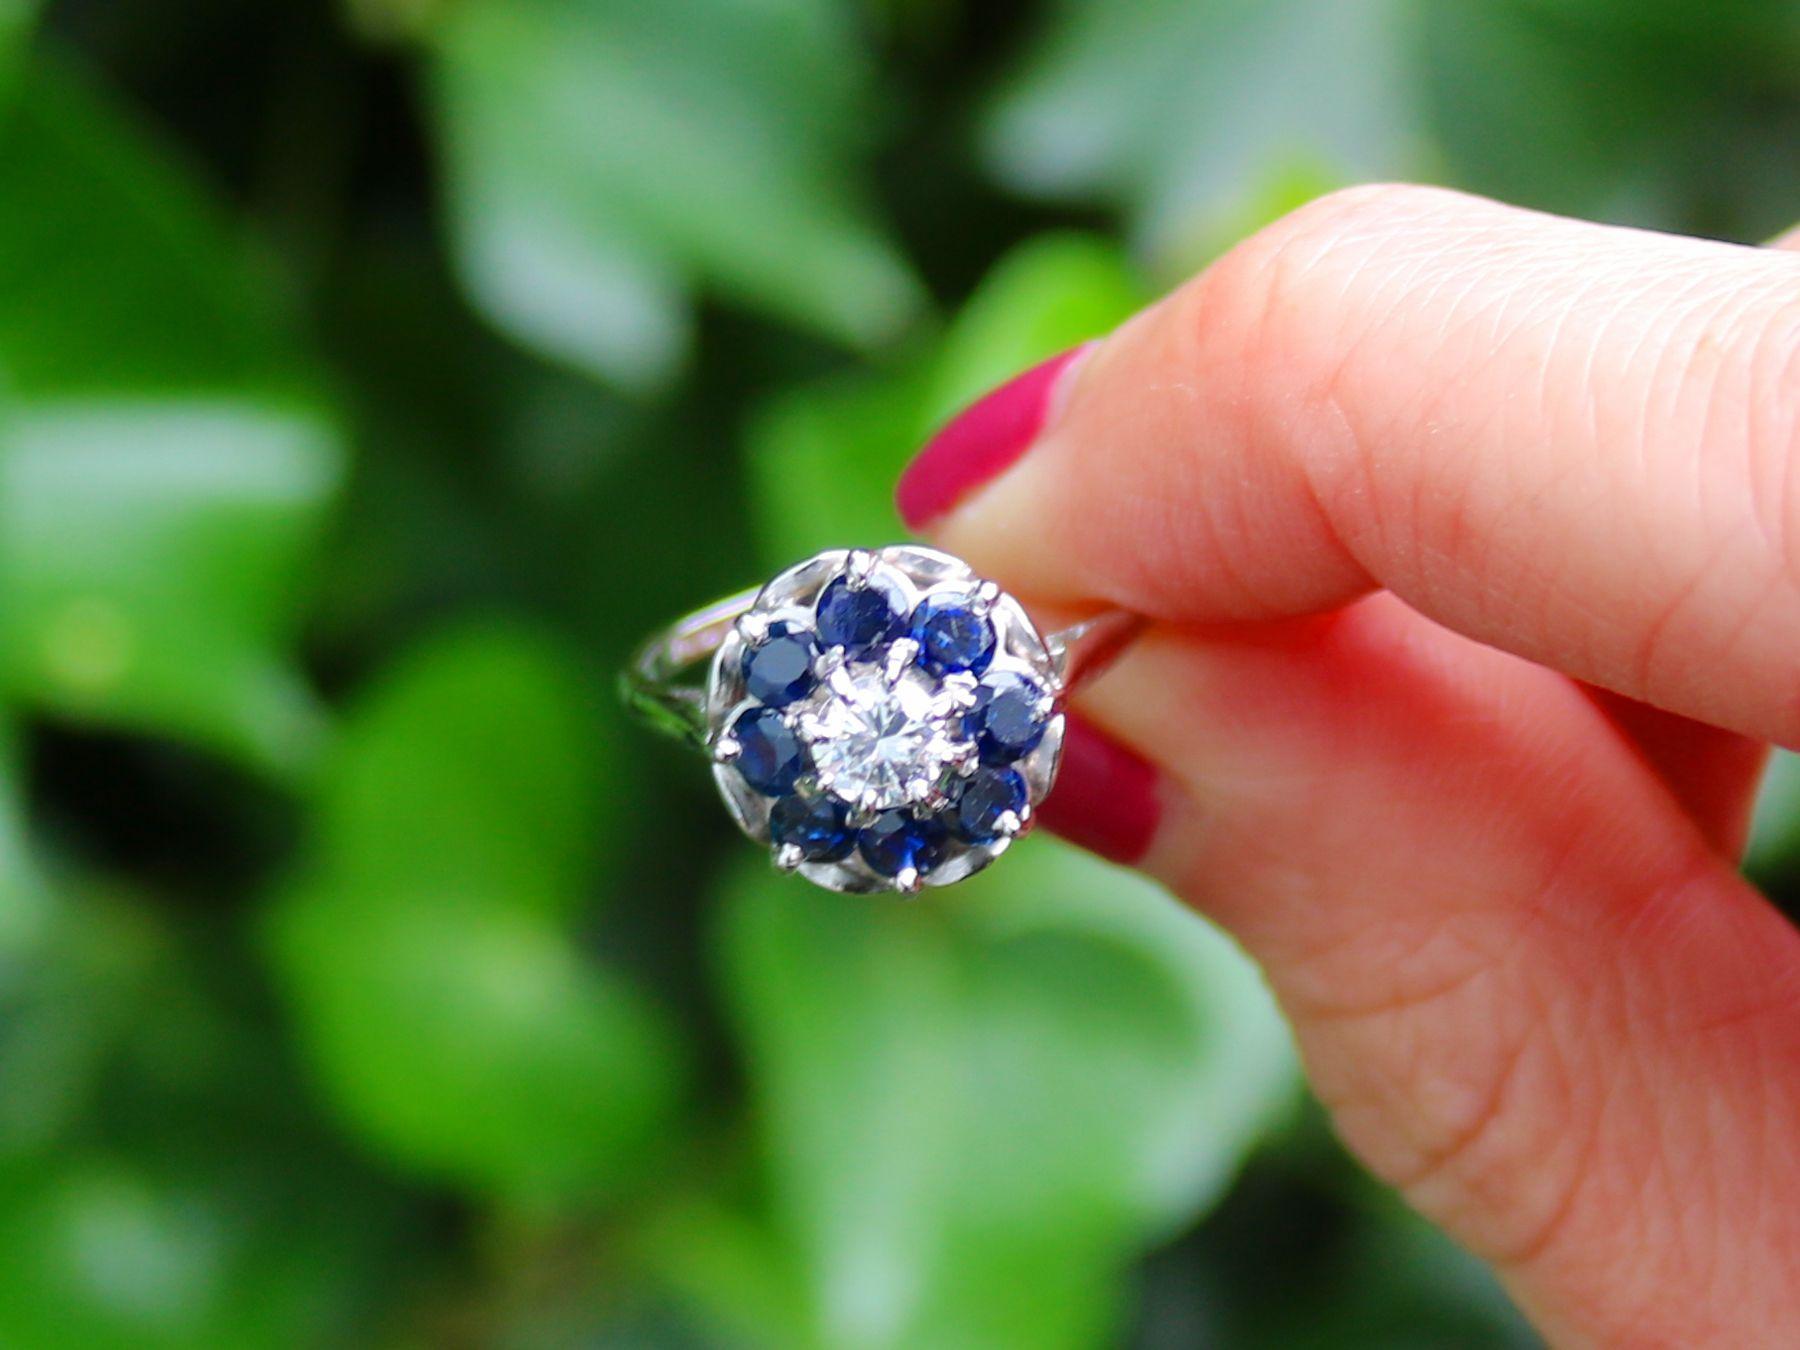 A fine and impressive vintage 1970s 0.64 carat sapphire and 0.41 carat diamond 18 karat white gold cluster ring; part of our diverse vintage jewelry/estate jewelry collections

This fine and impressive 1970s sapphire and diamond cluster ring has